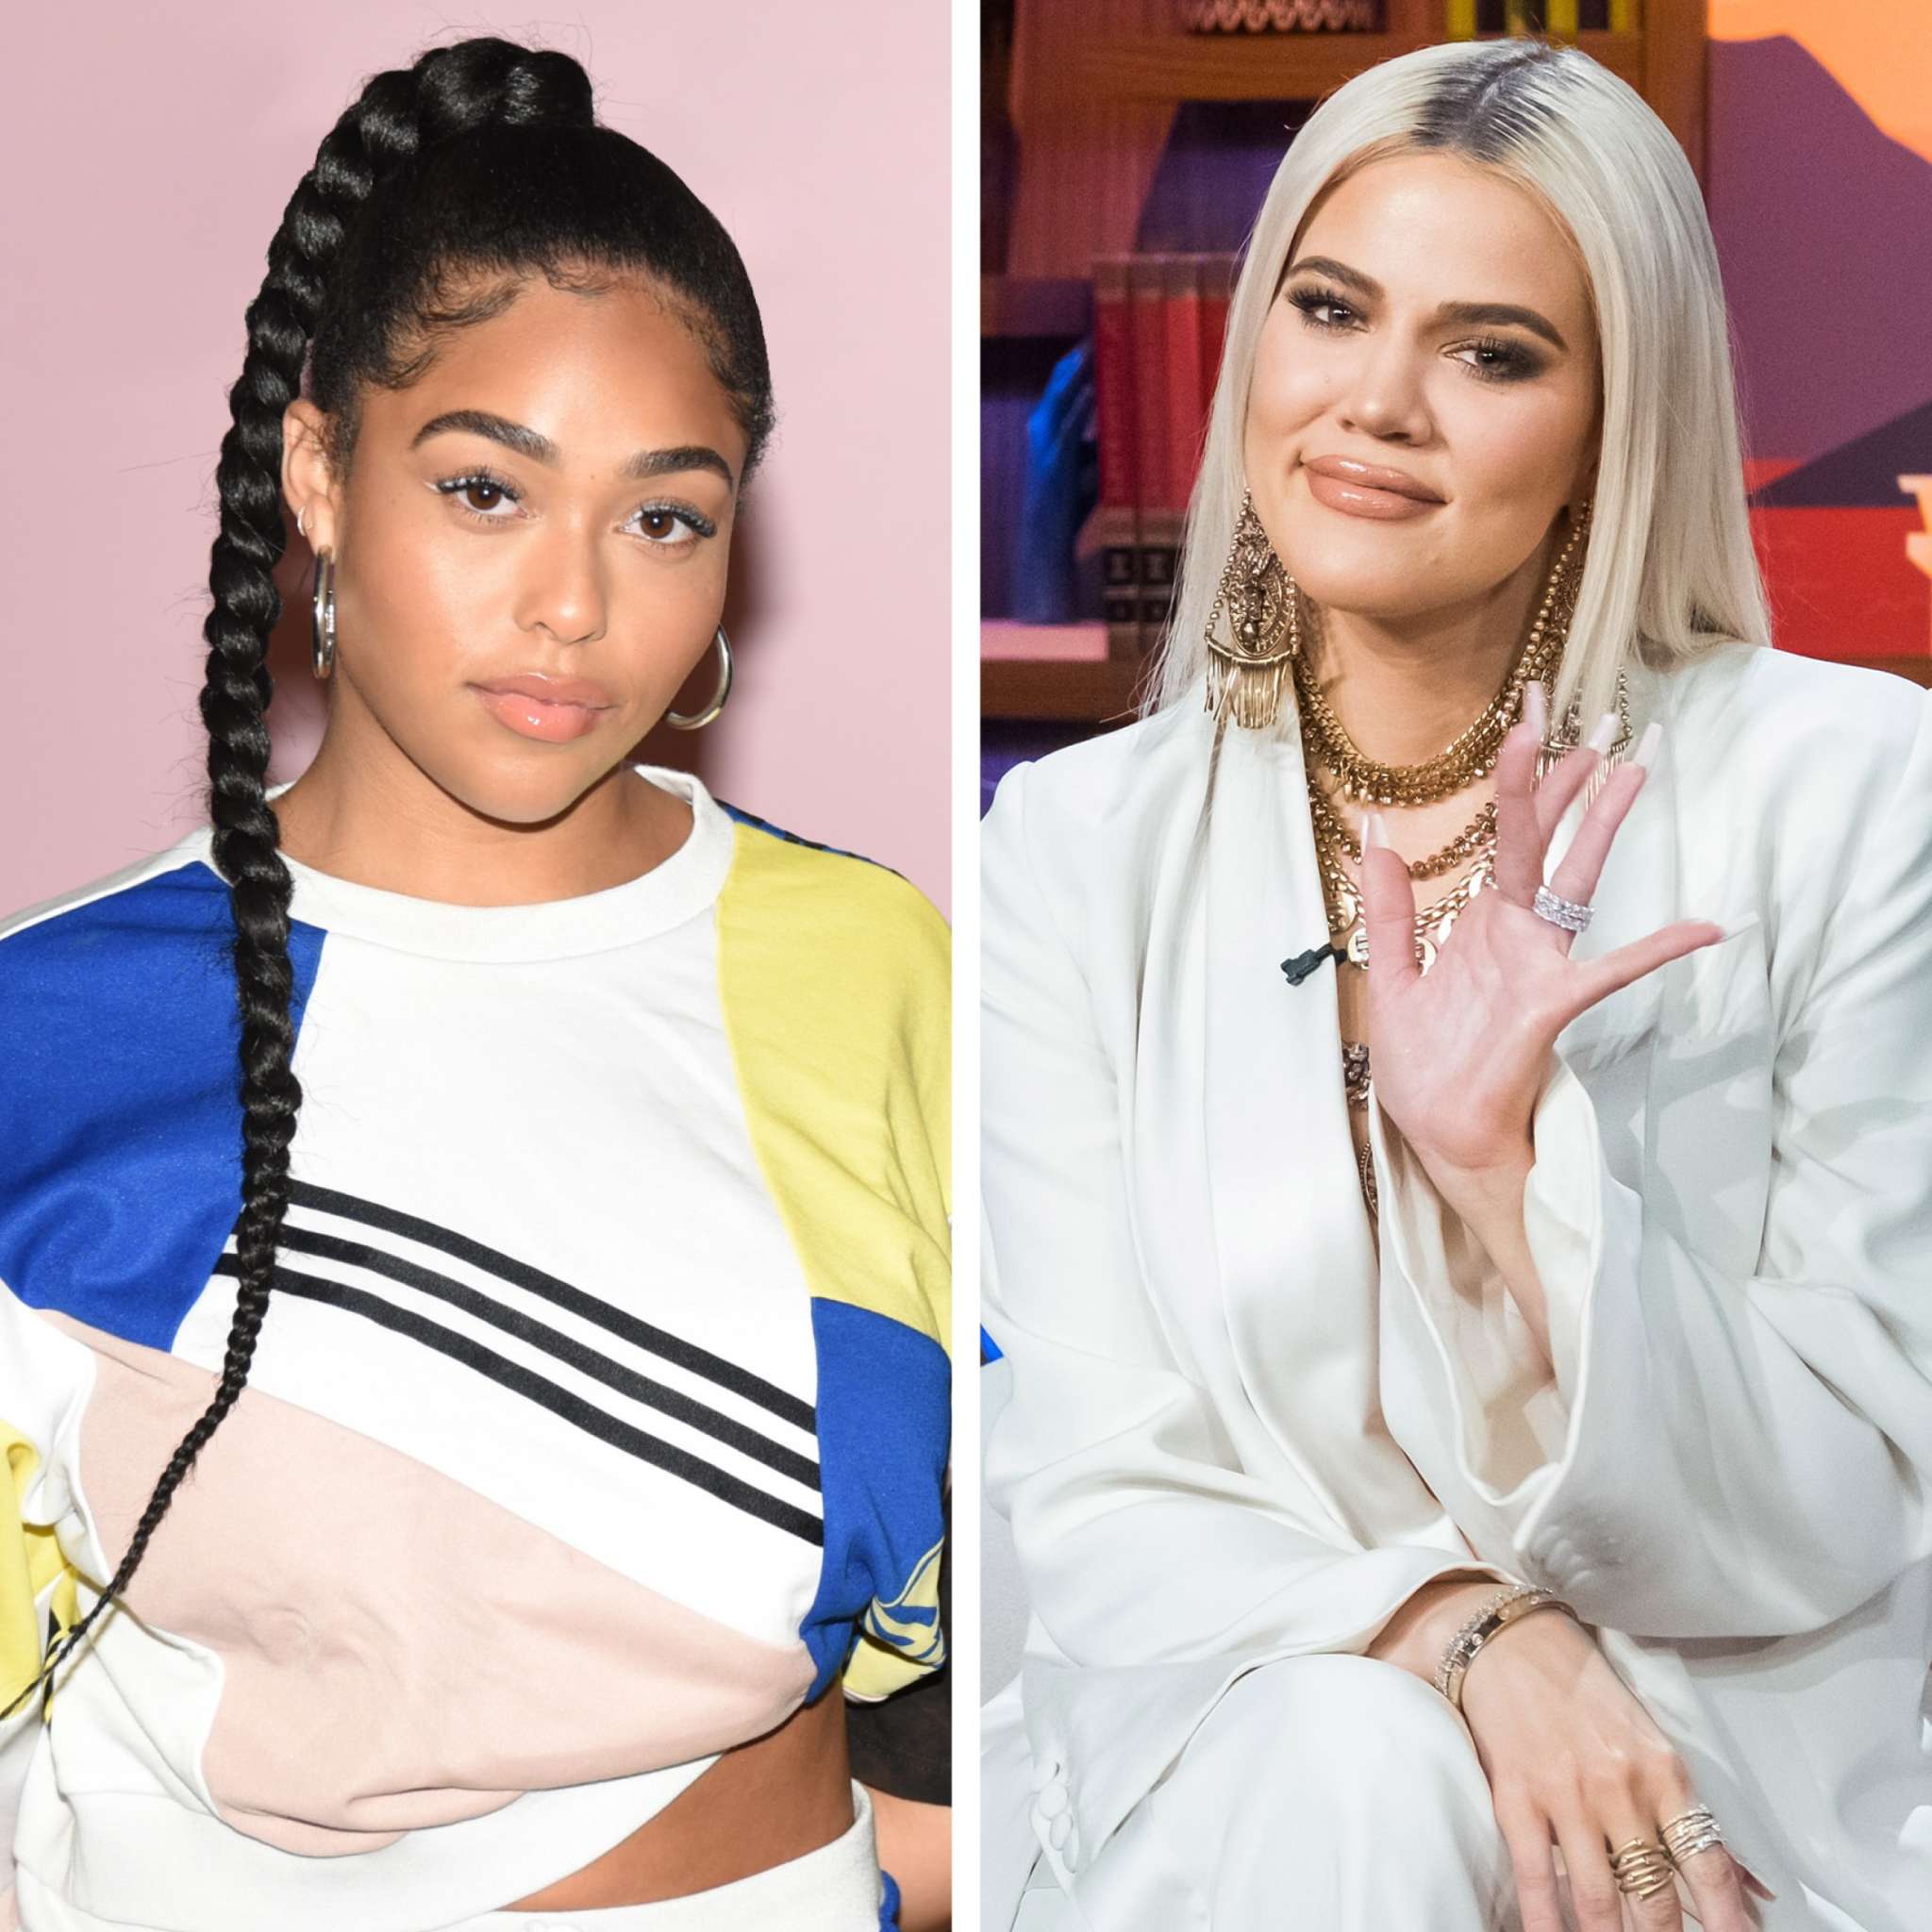 Khloe Kardashian Drops The Bomb And Fans Are Convinced She's Slamming Jordyn Woods Following The Lie Detector Test